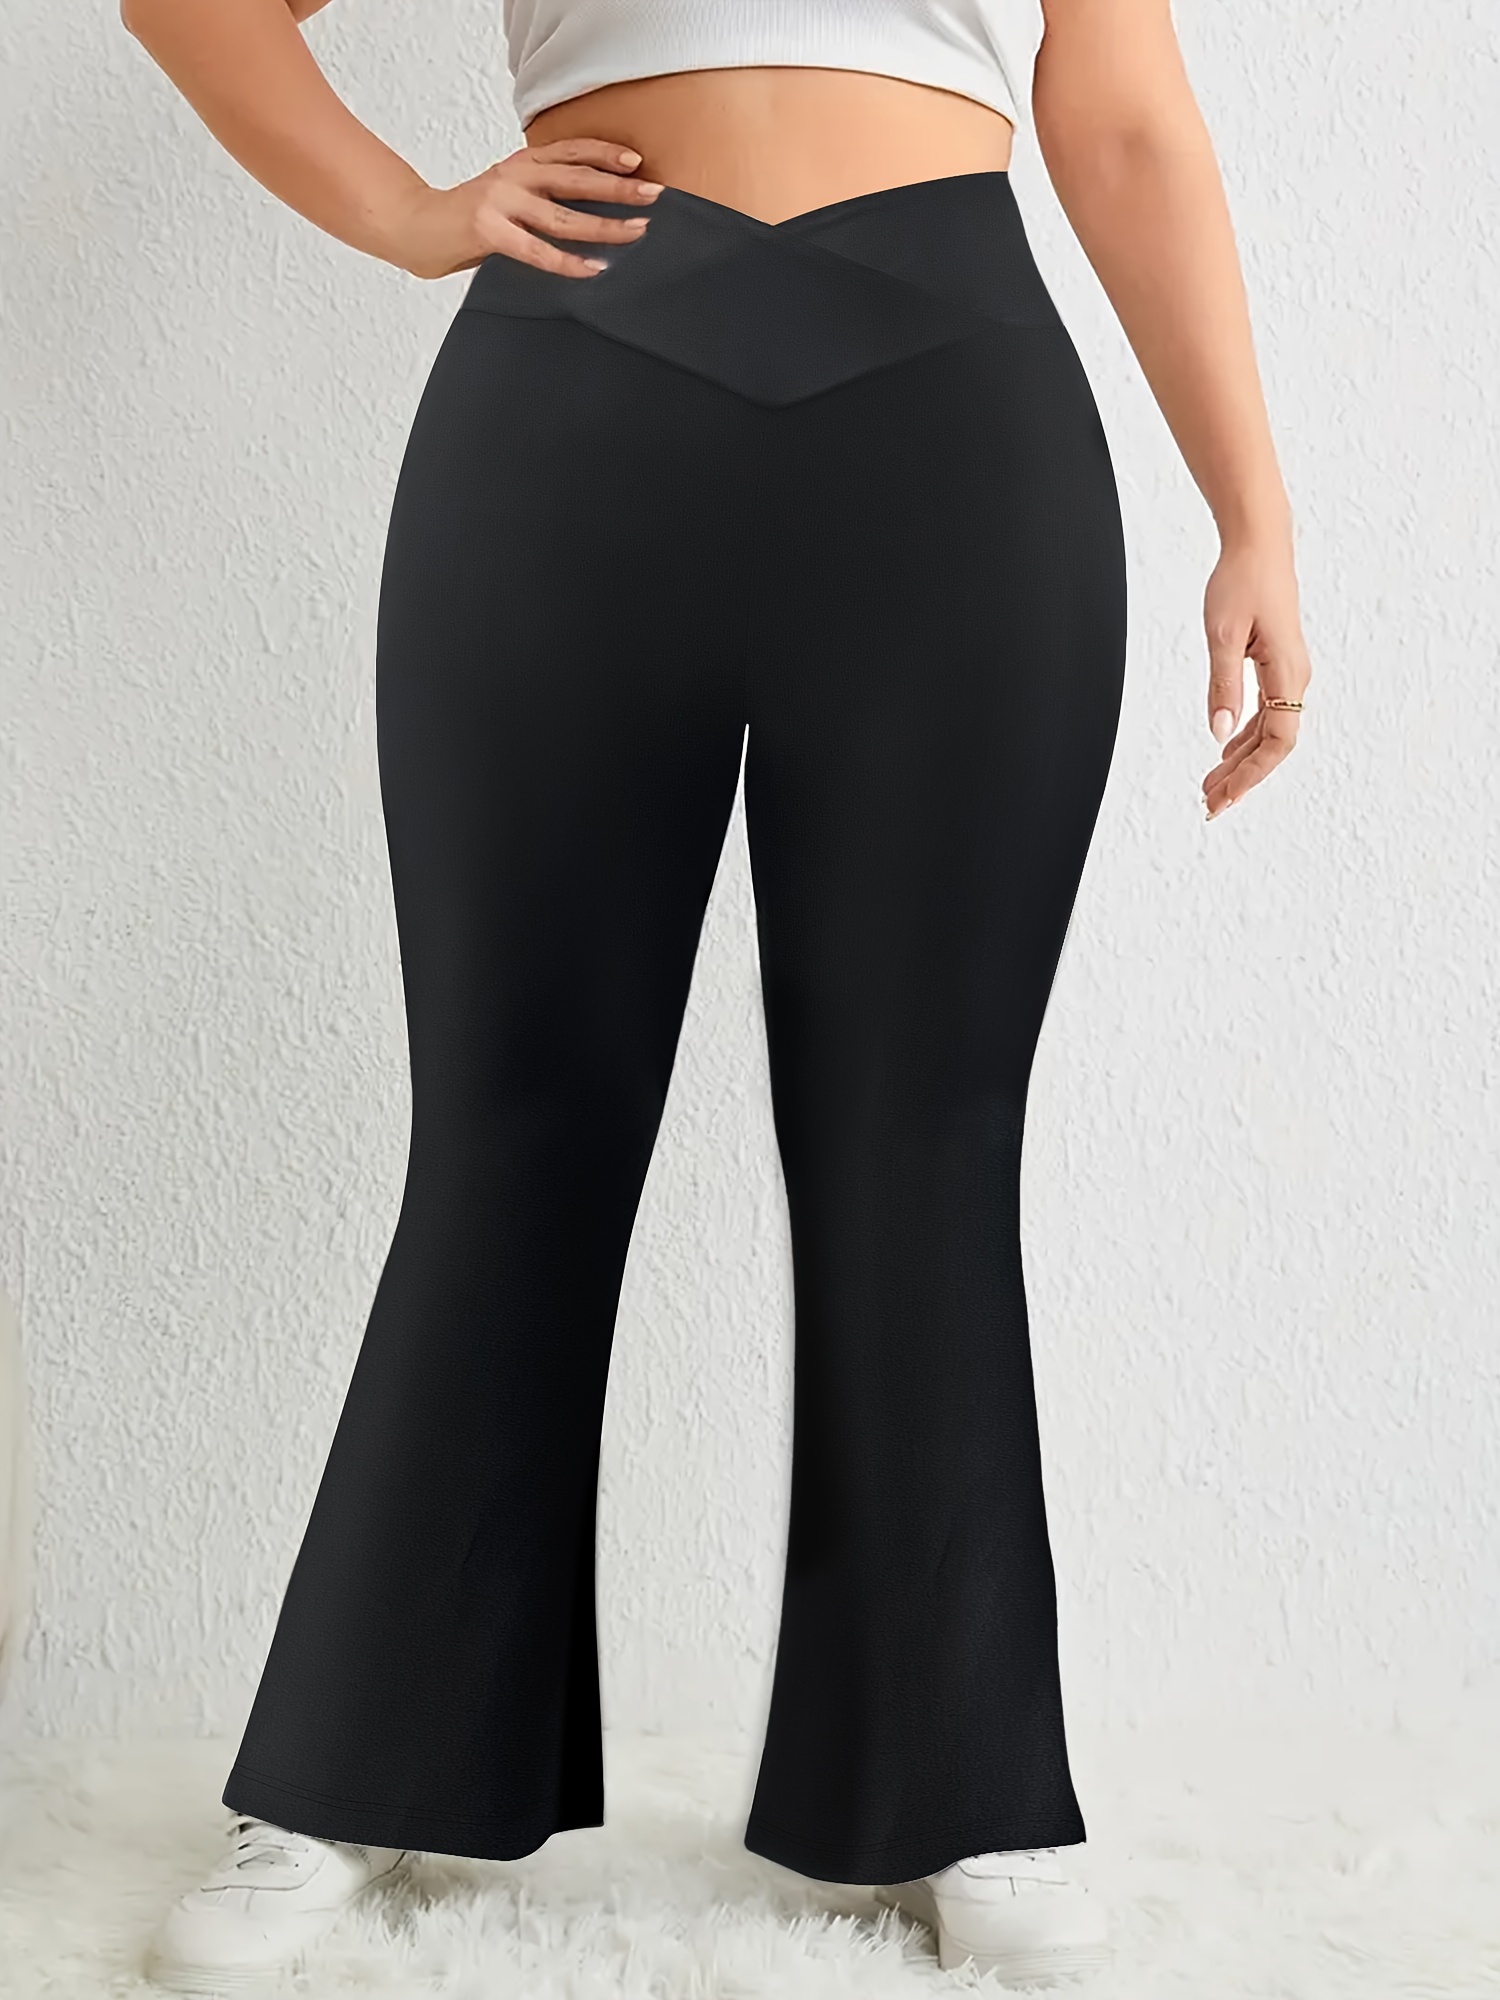 Women's Activewear: Black Tummy Control Bell Bottom Pants - Butt Lifting &  Stretchy Yoga Casual Flared Pants